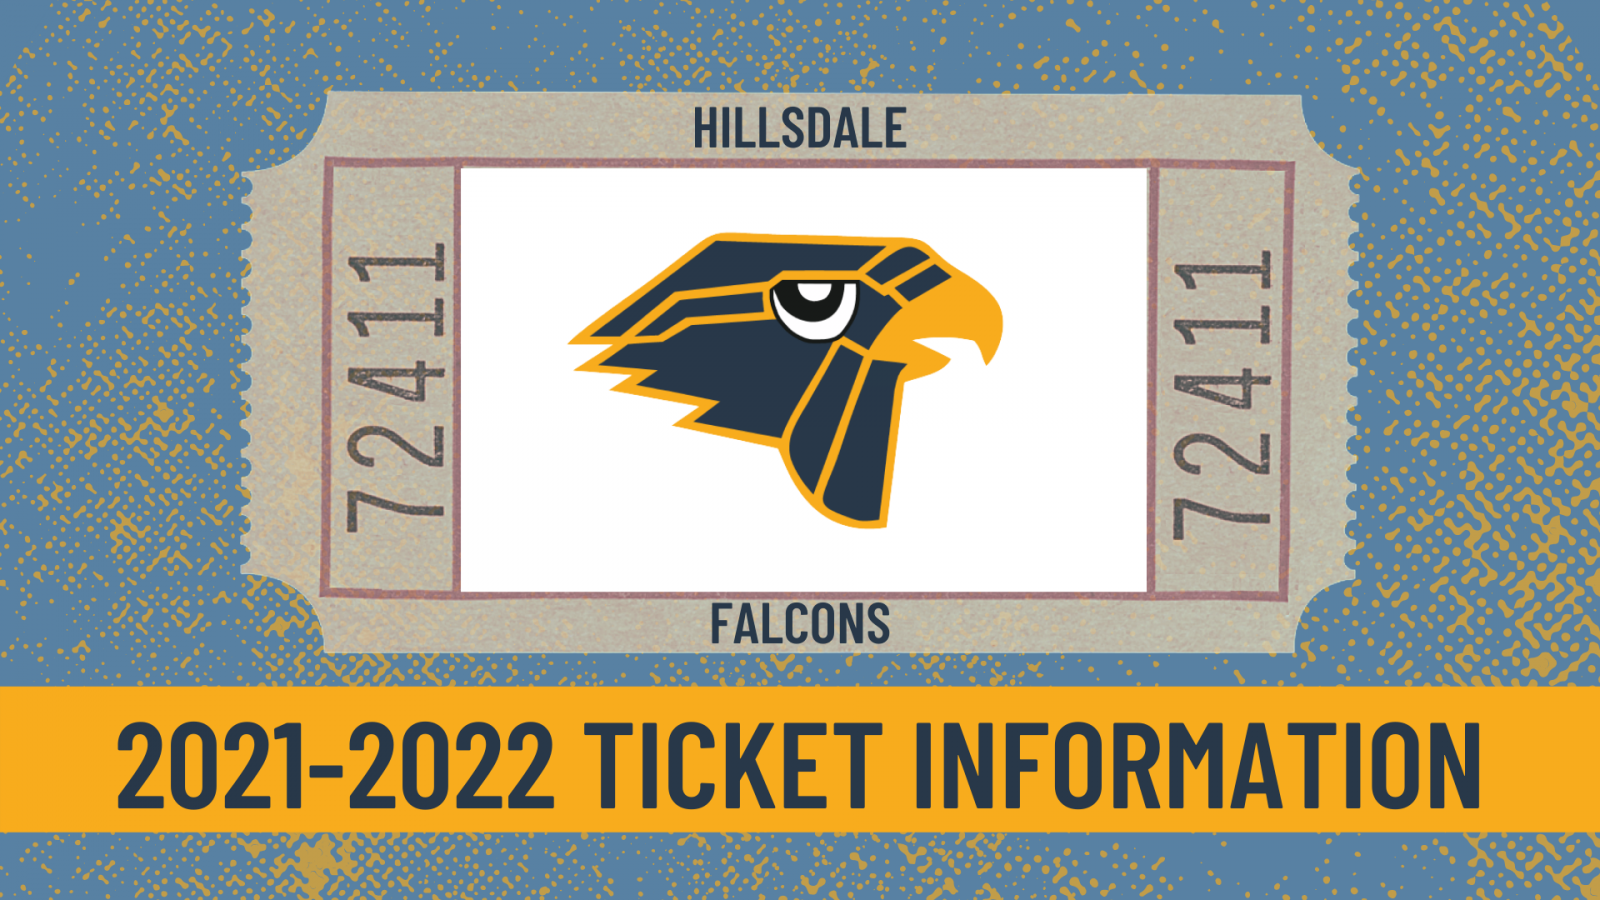 A graphic image of a ticket with the Falcon logo on it and a banner under with the text "2021-2022 Ticket Information"